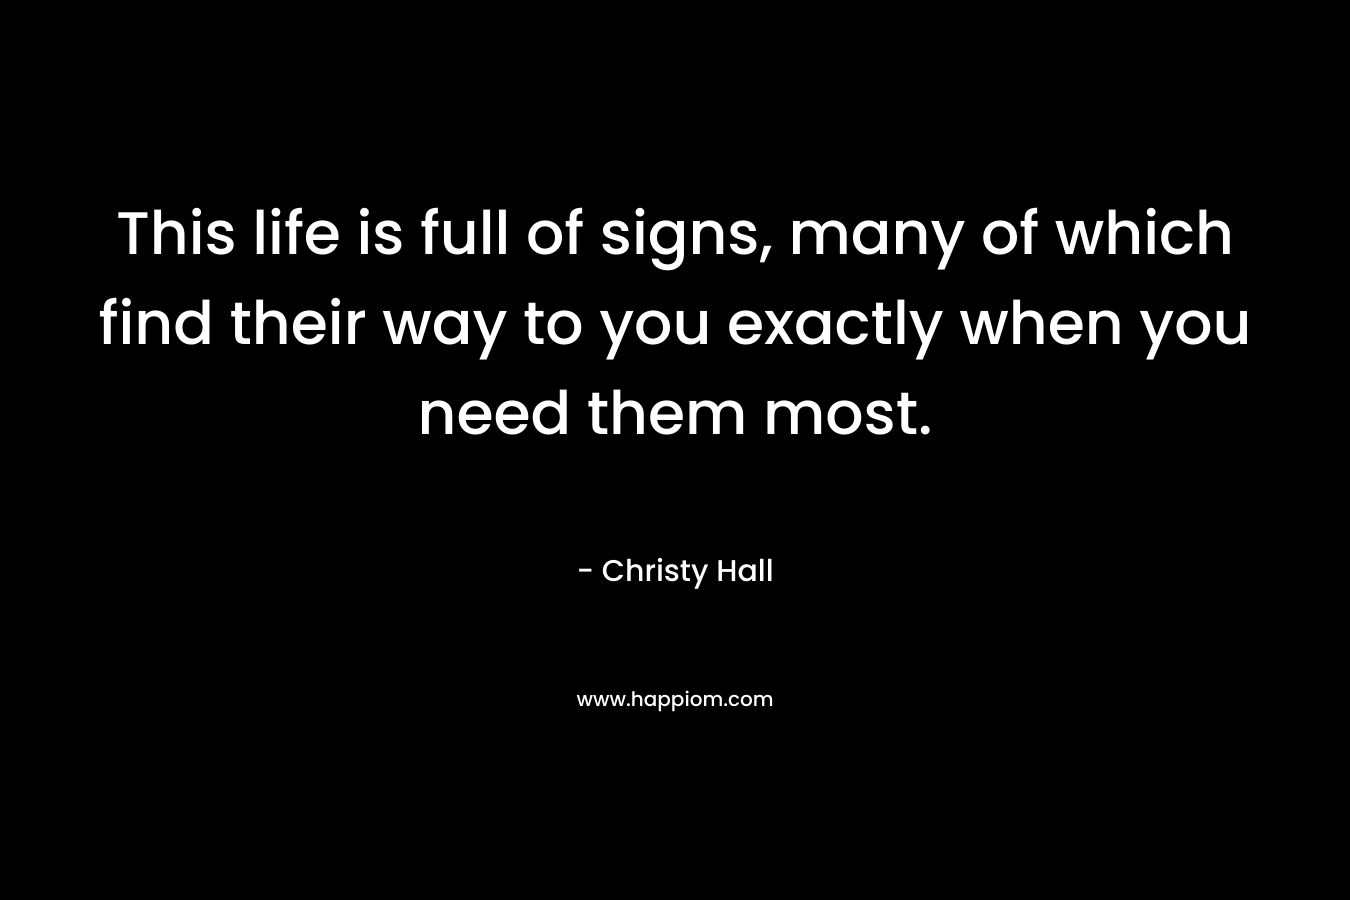 This life is full of signs, many of which find their way to you exactly when you need them most.